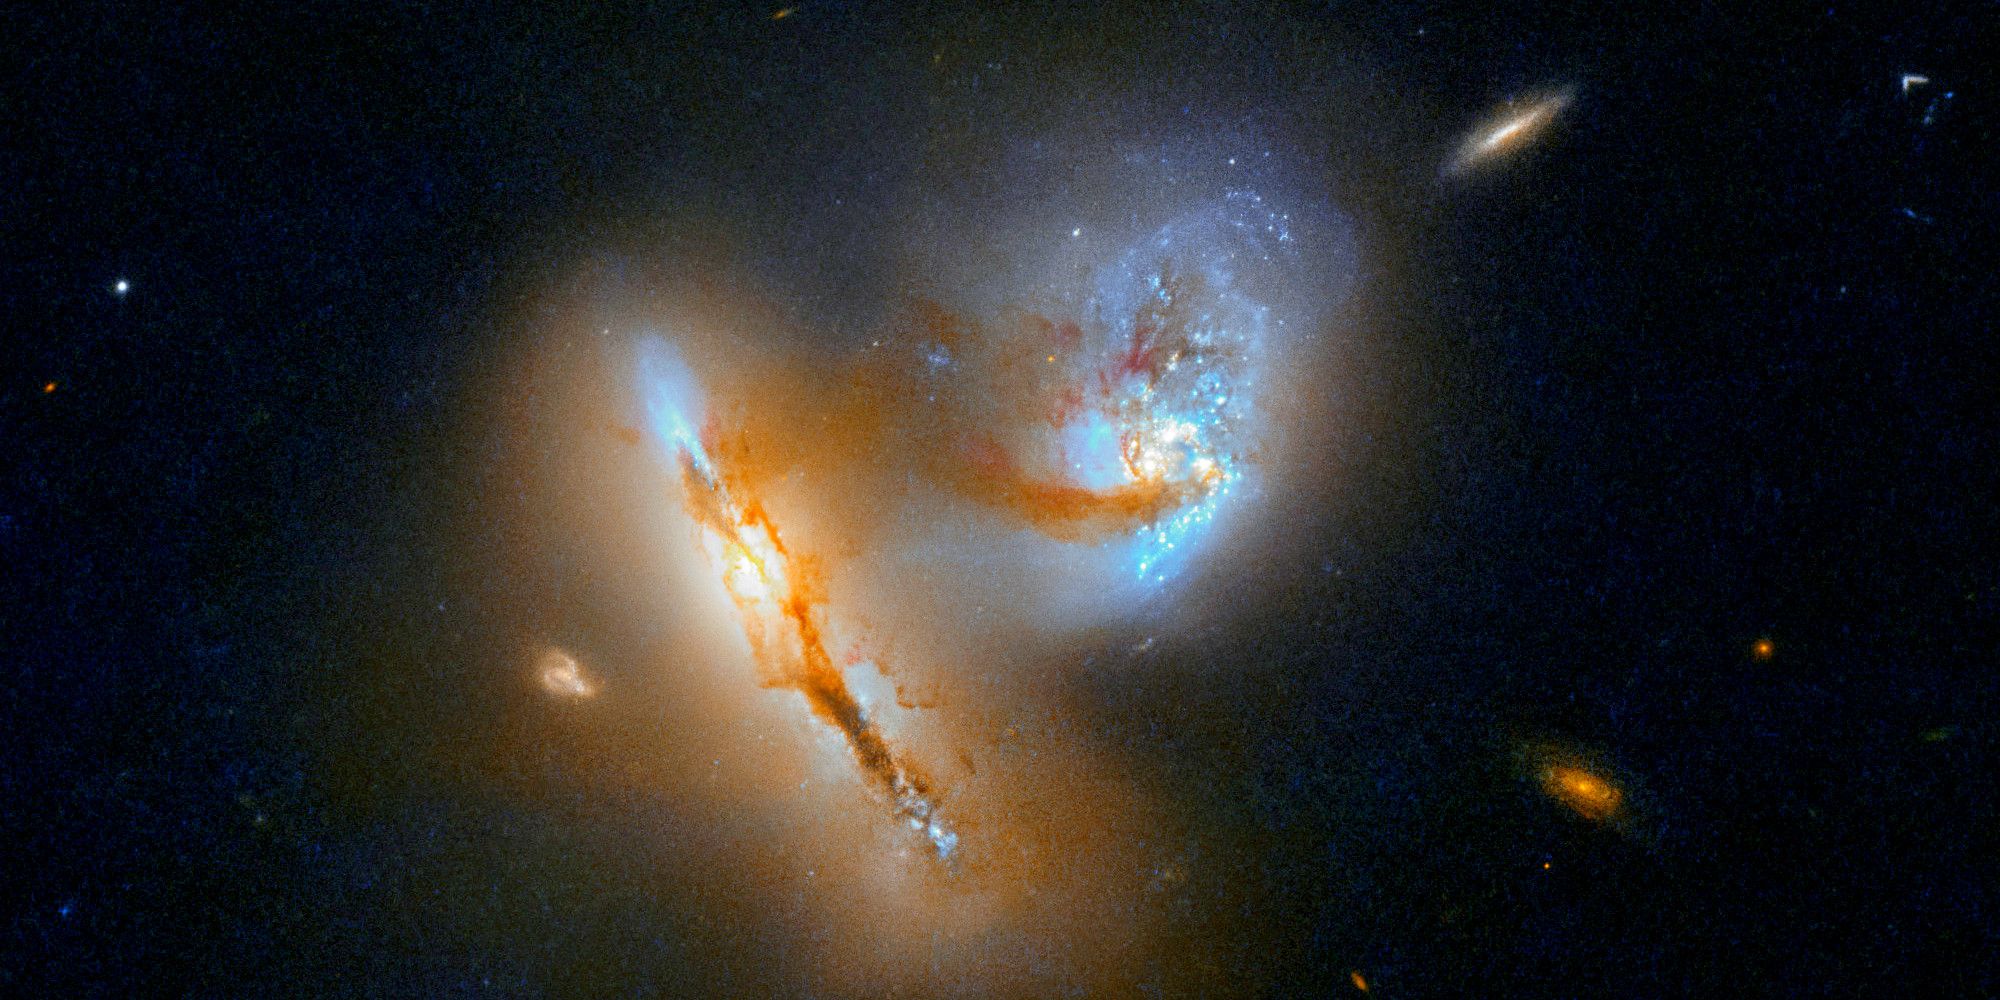 Galactic Creatures at Play